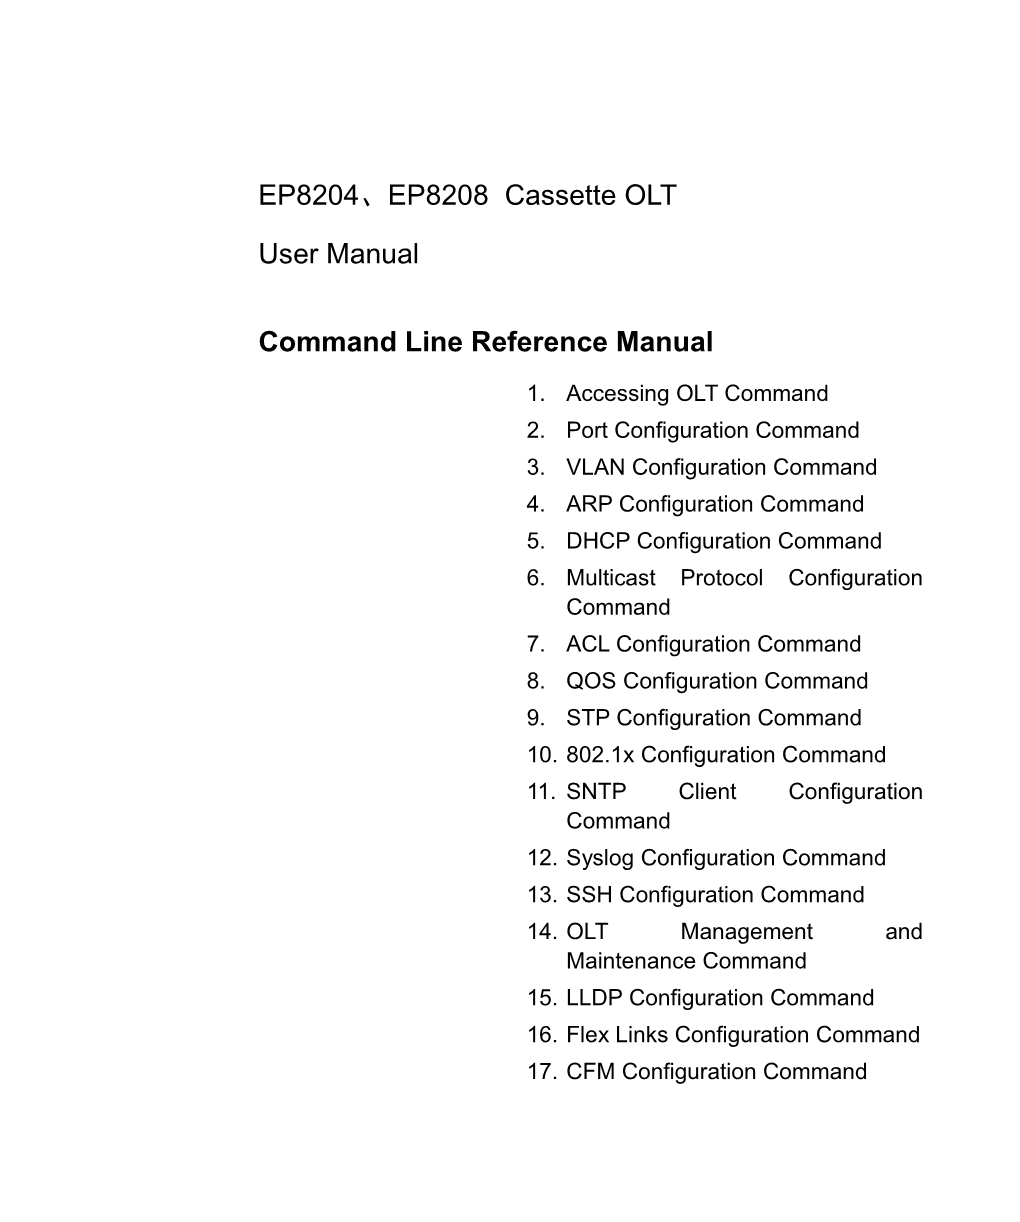 Command Line Reference Manual